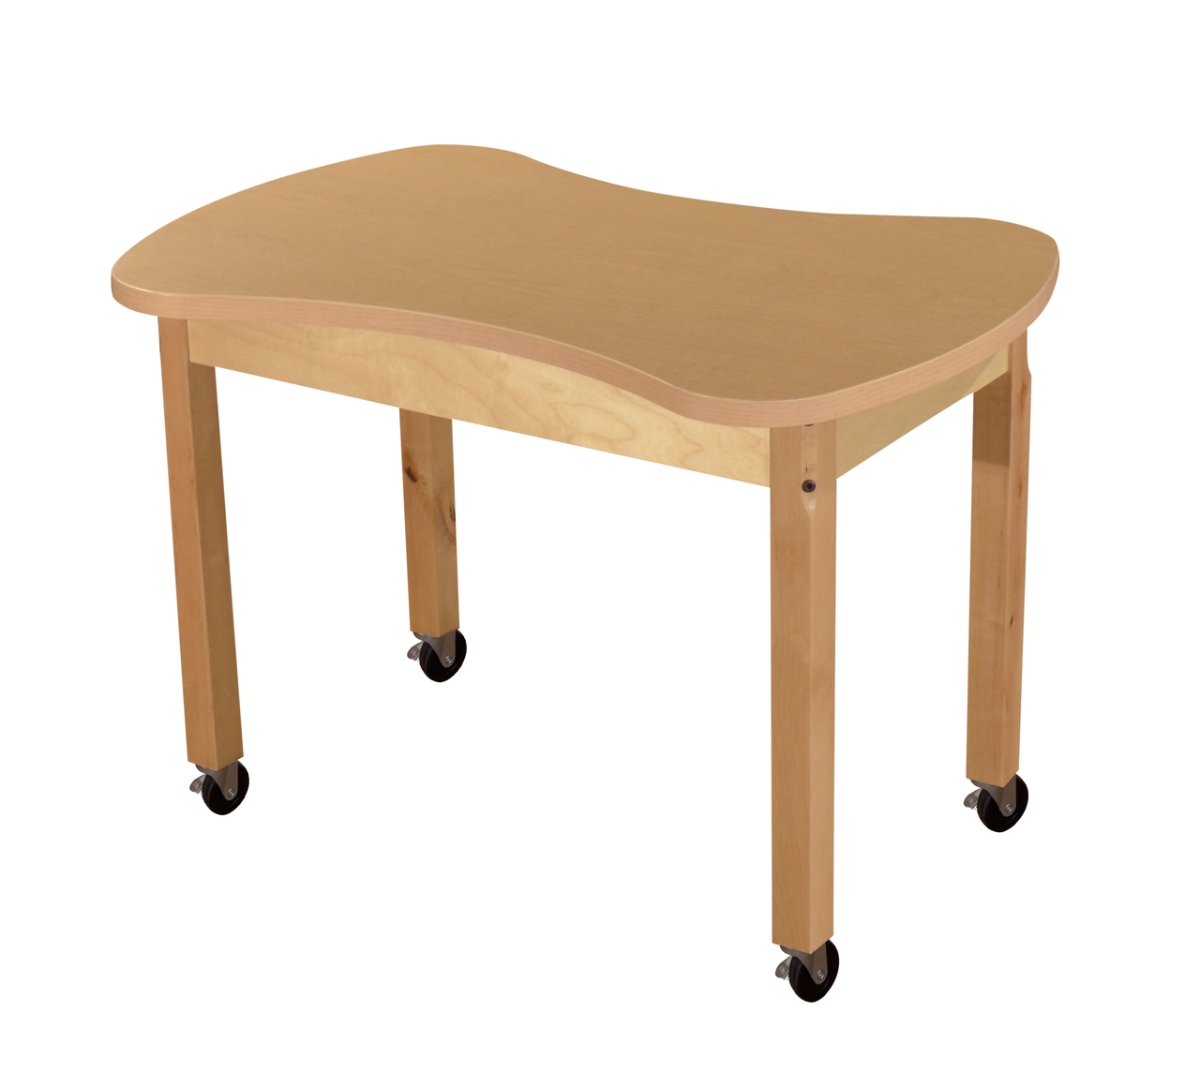 Picture of Wood Designs HPL2436C16C6 24 x 36 in. Mobile Synergy Junction, High Pressure Laminate Table with Hardwood Legs - 16 in.